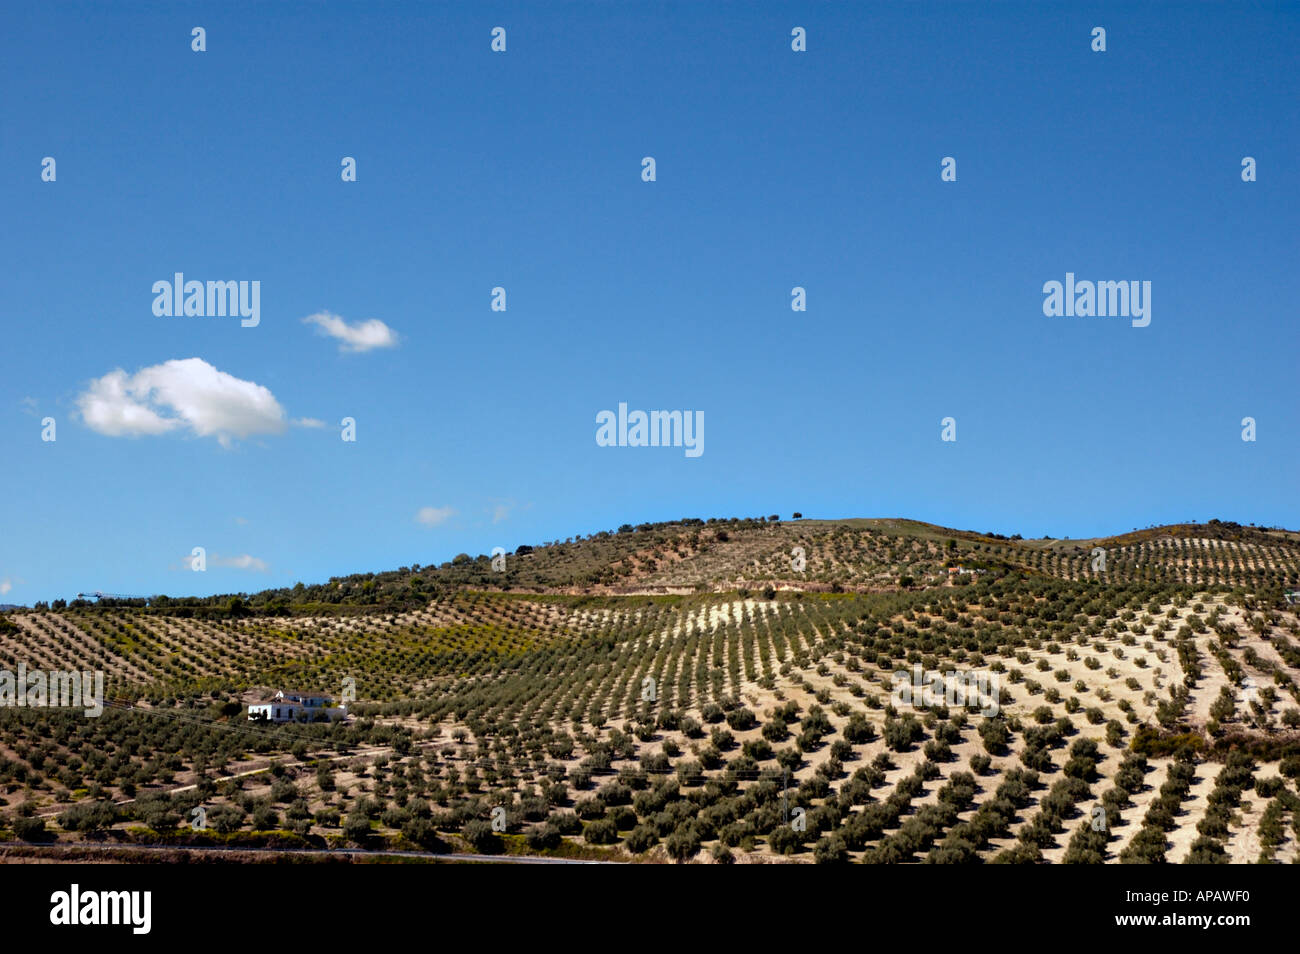 Spain, Landscape  - Fields Of Olives Trees in Andalucia, Spain Stock Photo